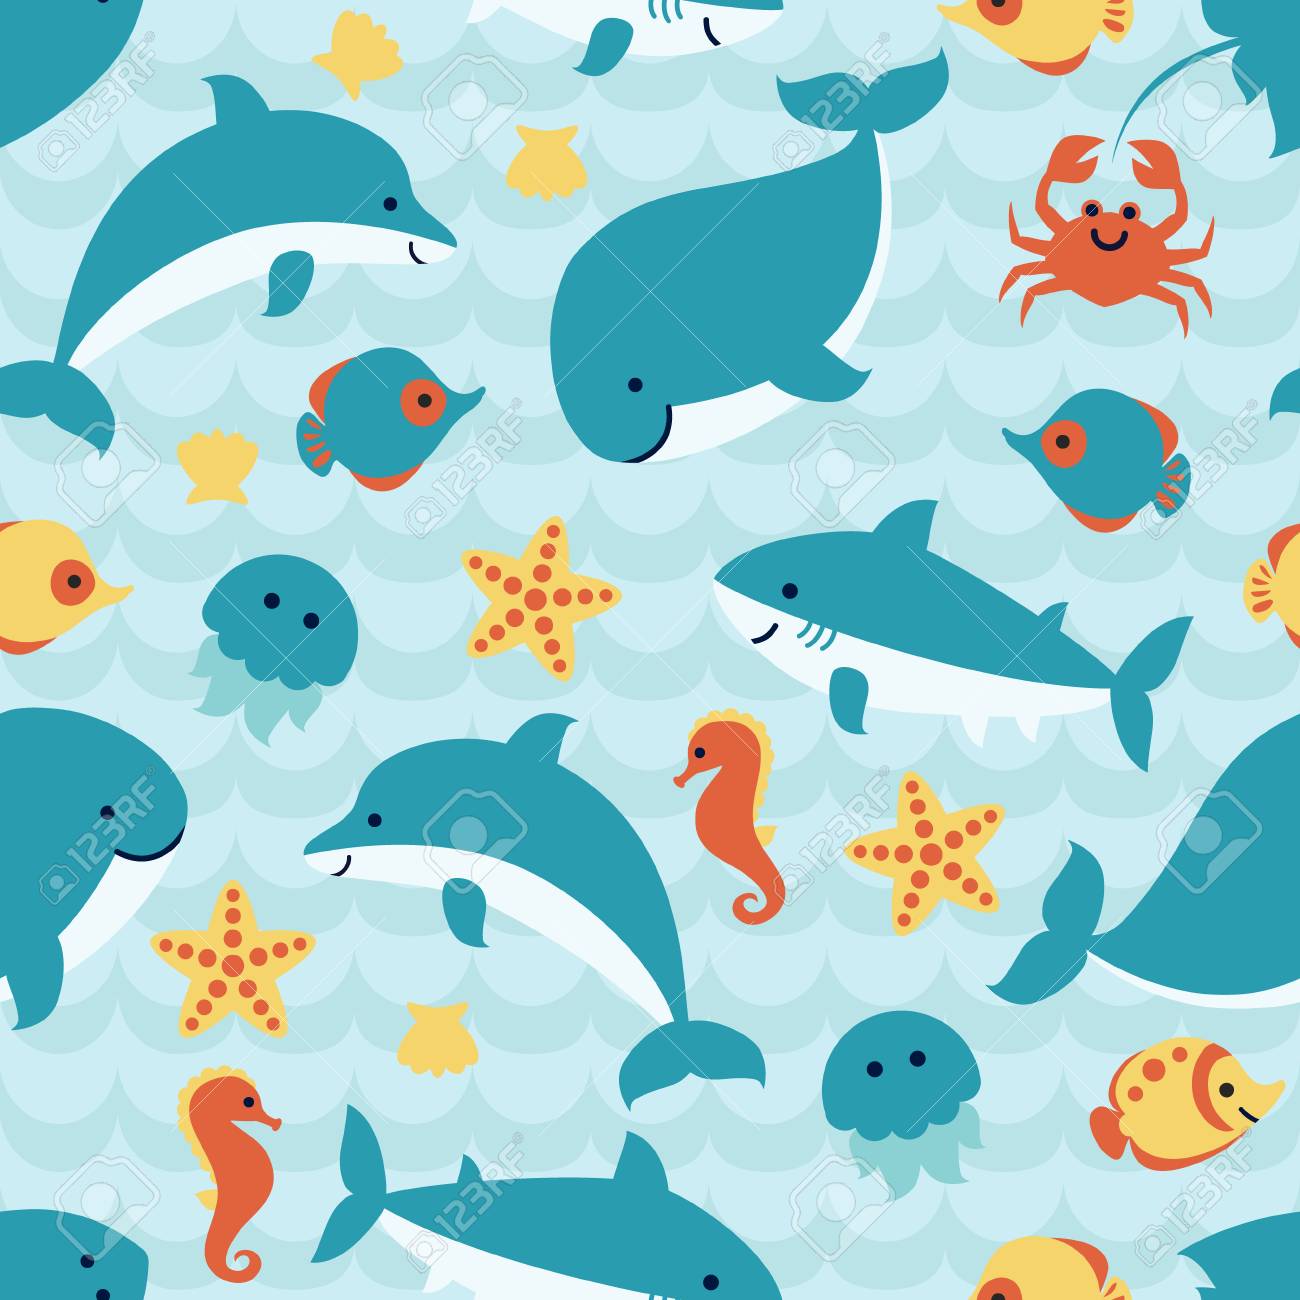 Seamless Pattern With Cute Cartoon Sea Animals On Blue Wave